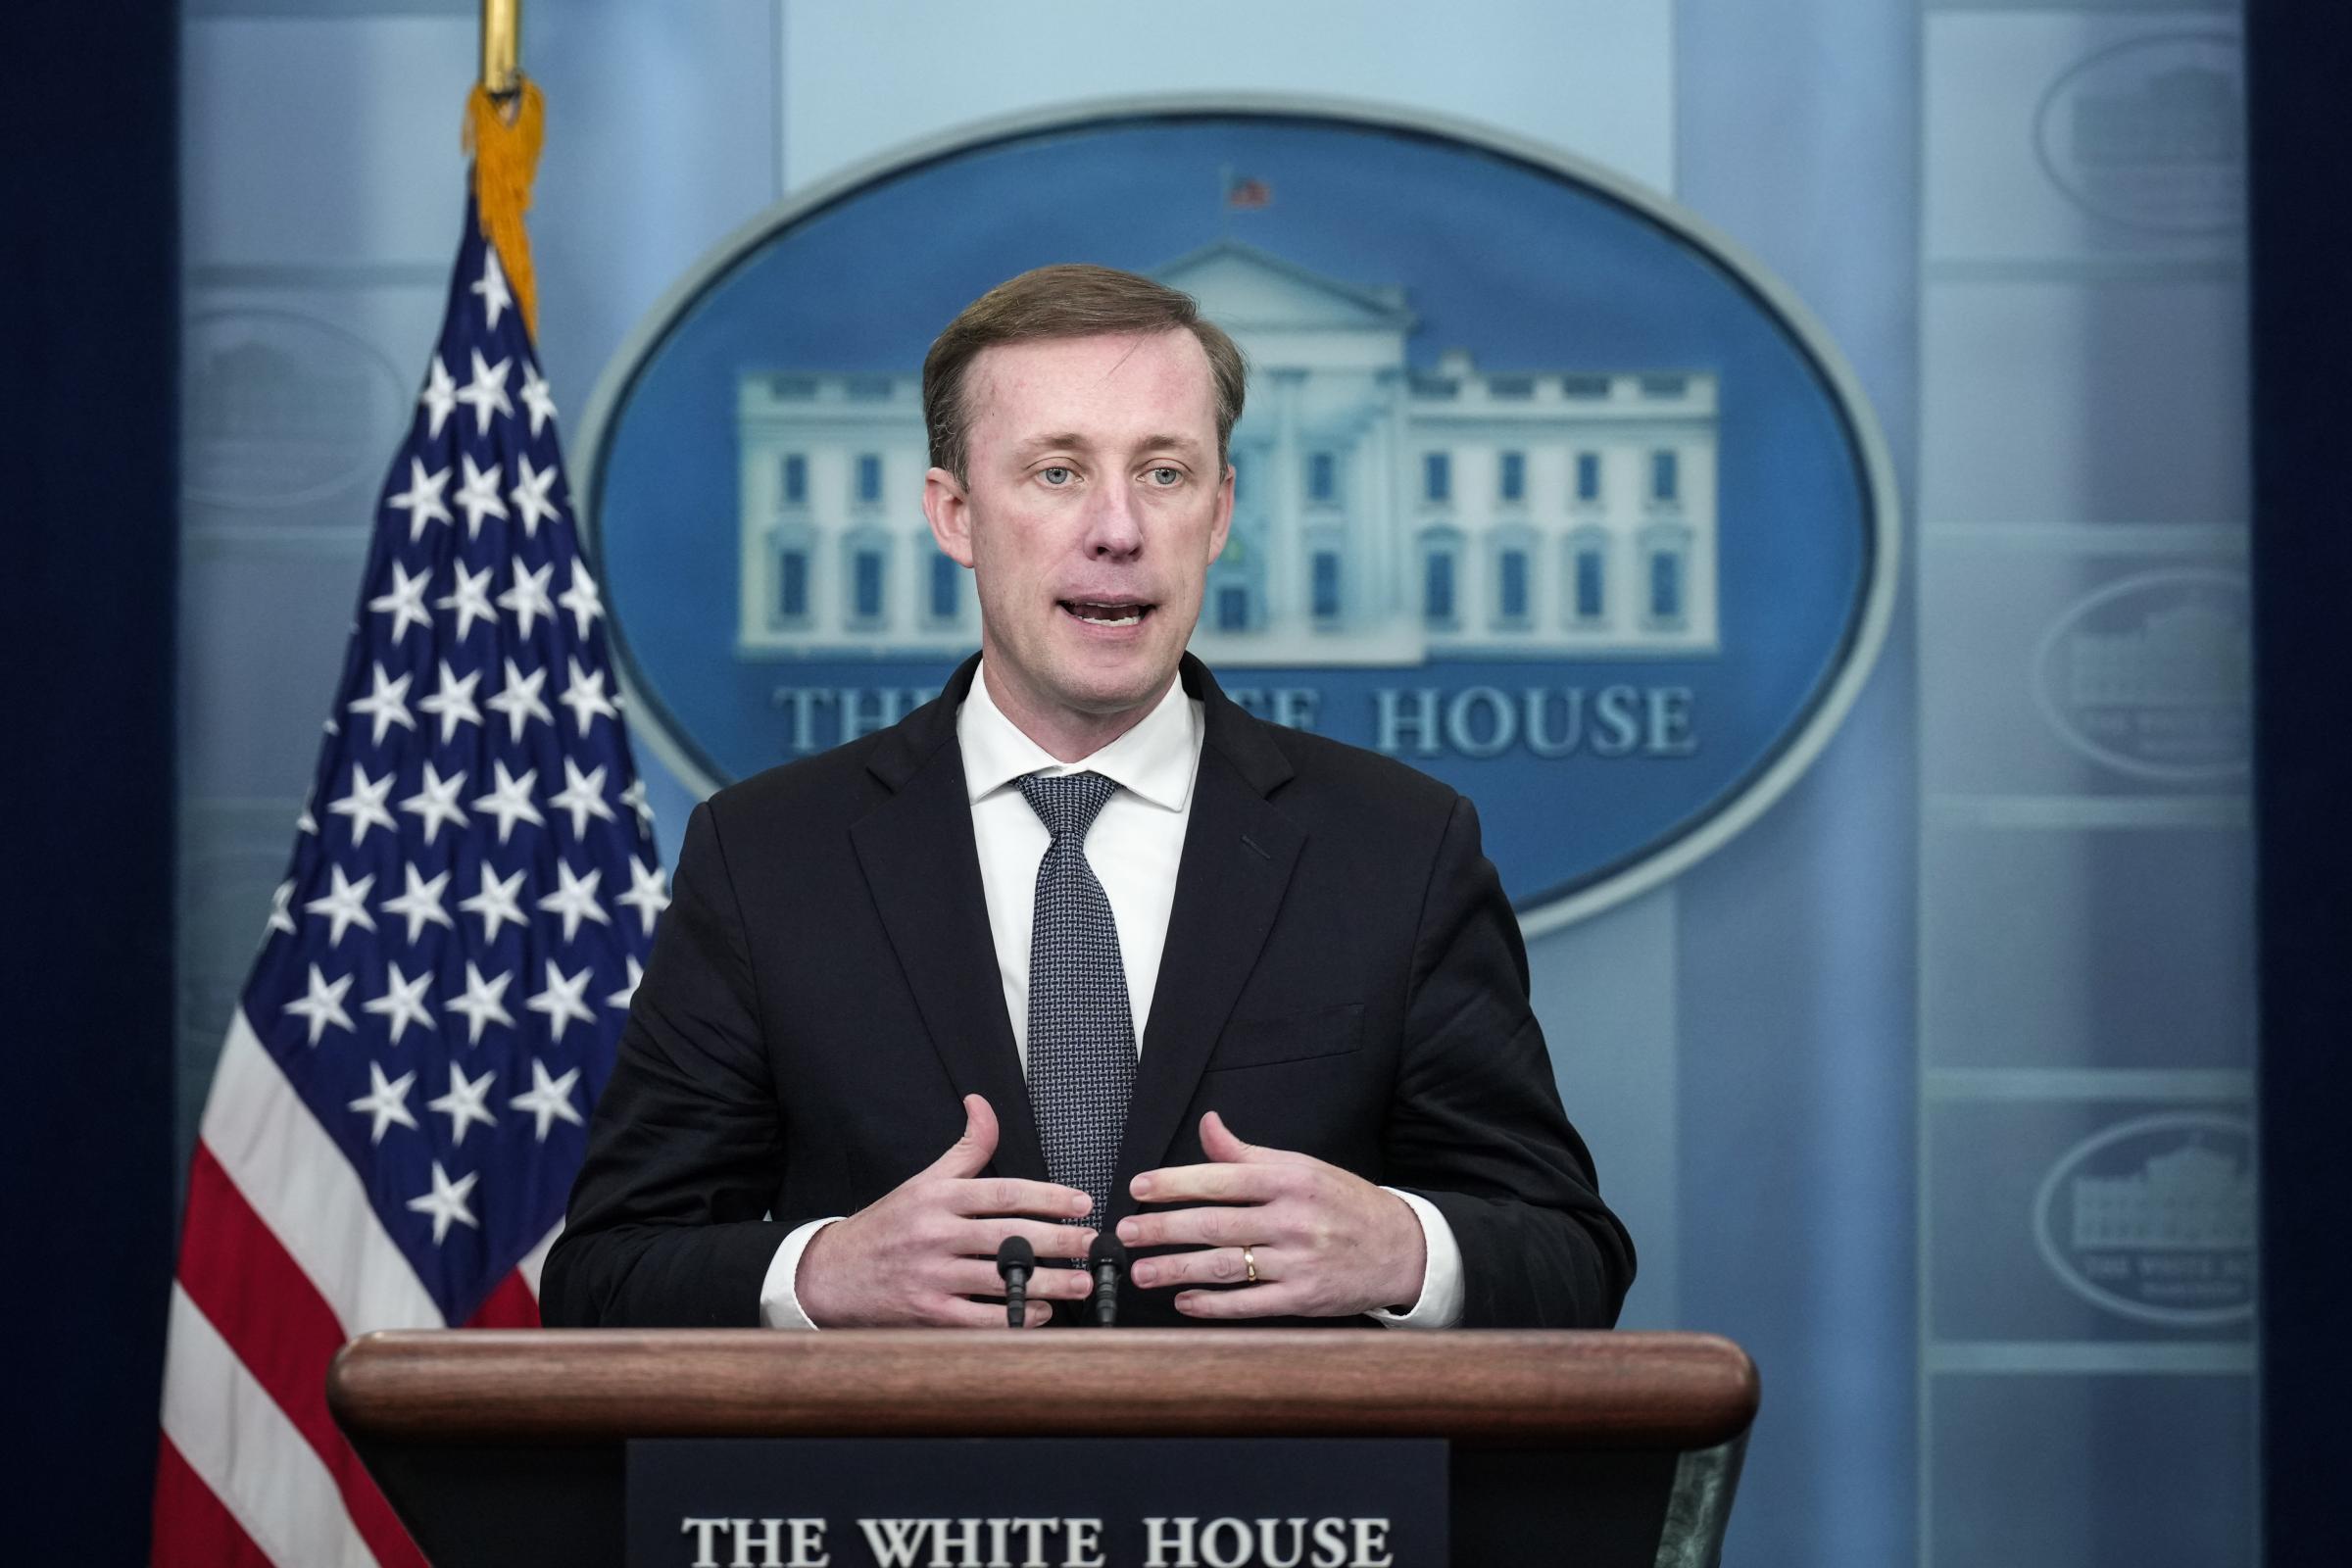 WASHINGTON, DC - SEPTEMBER 21: National Security Advisor Jake Sullivan speaks during the daily press briefing at the White House September 21, 2023 in Washington, DC. Ukrainian President Volodymyr Zelensky is in the nations capital to meet with